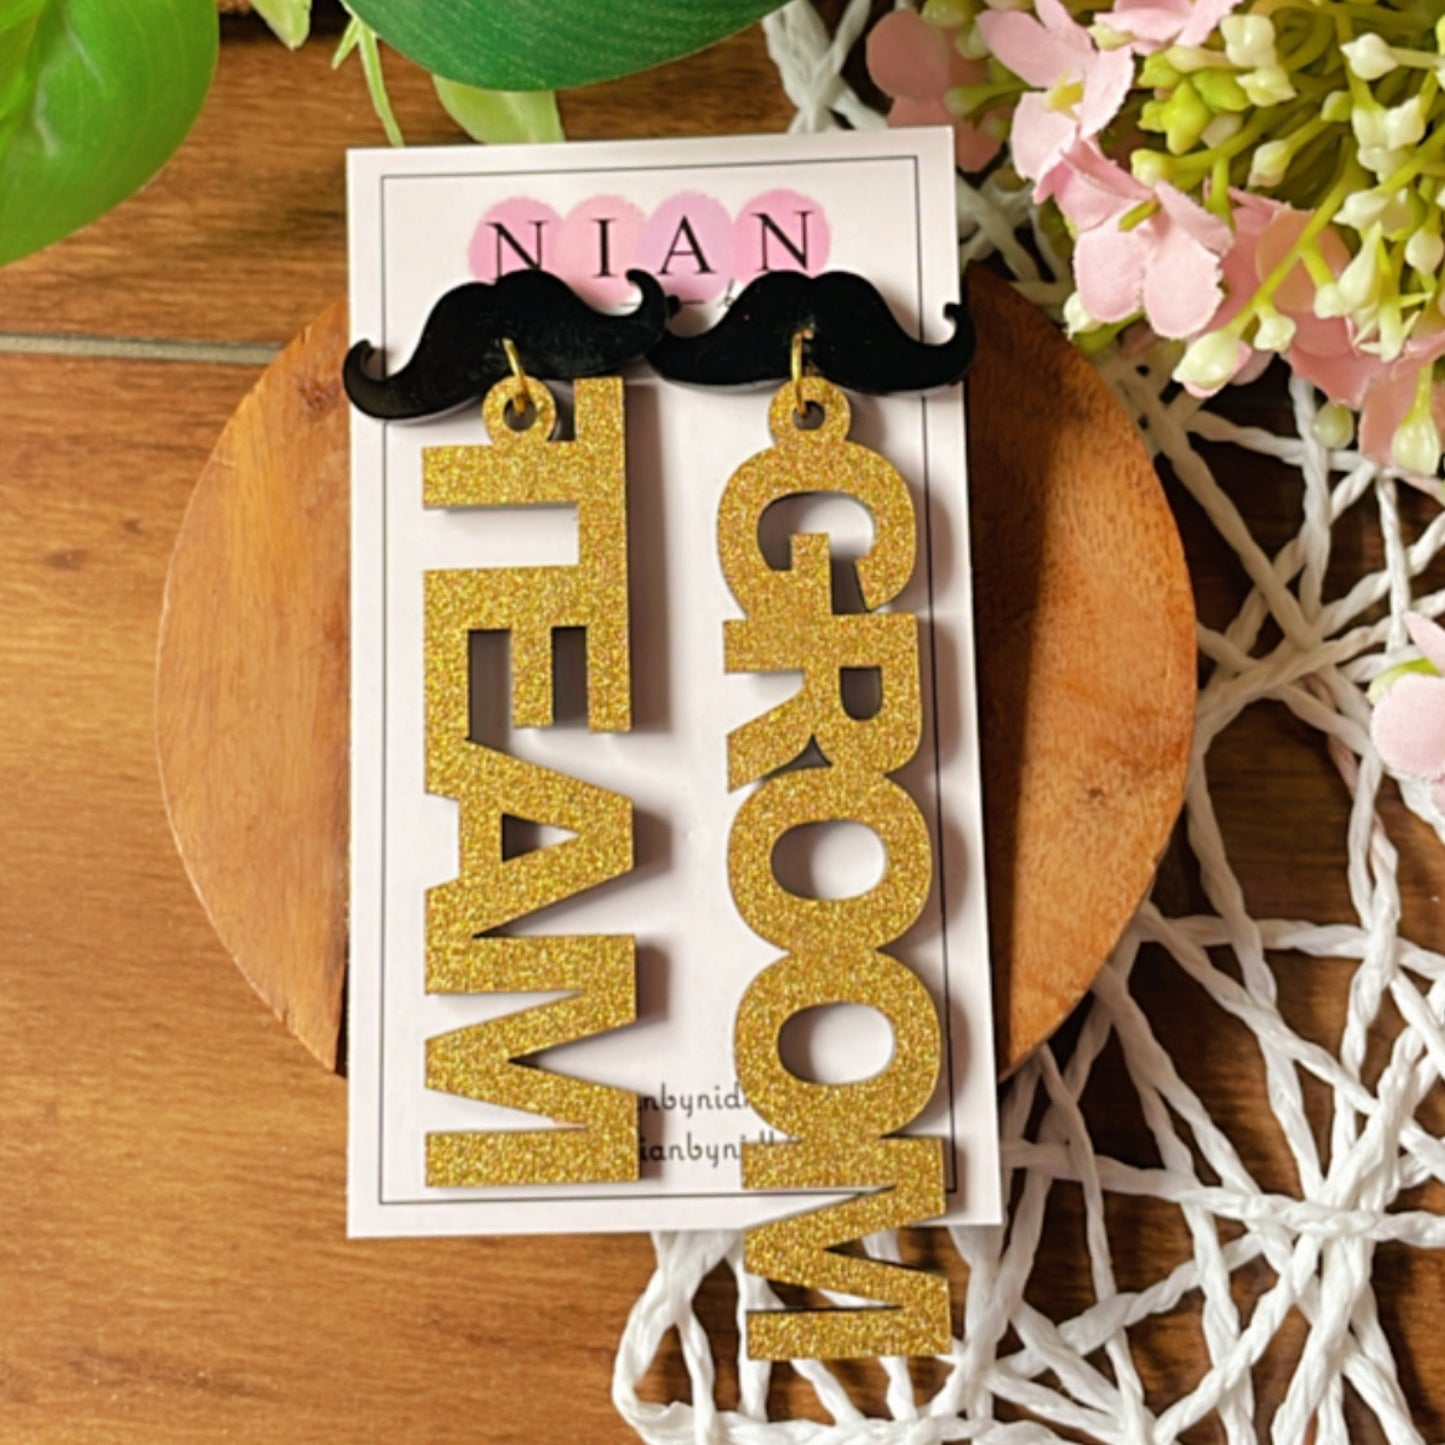 Team Groom Moustache Earrings - Shimmer Golden and Black - Nian by Nidhi - placed in a colorful background